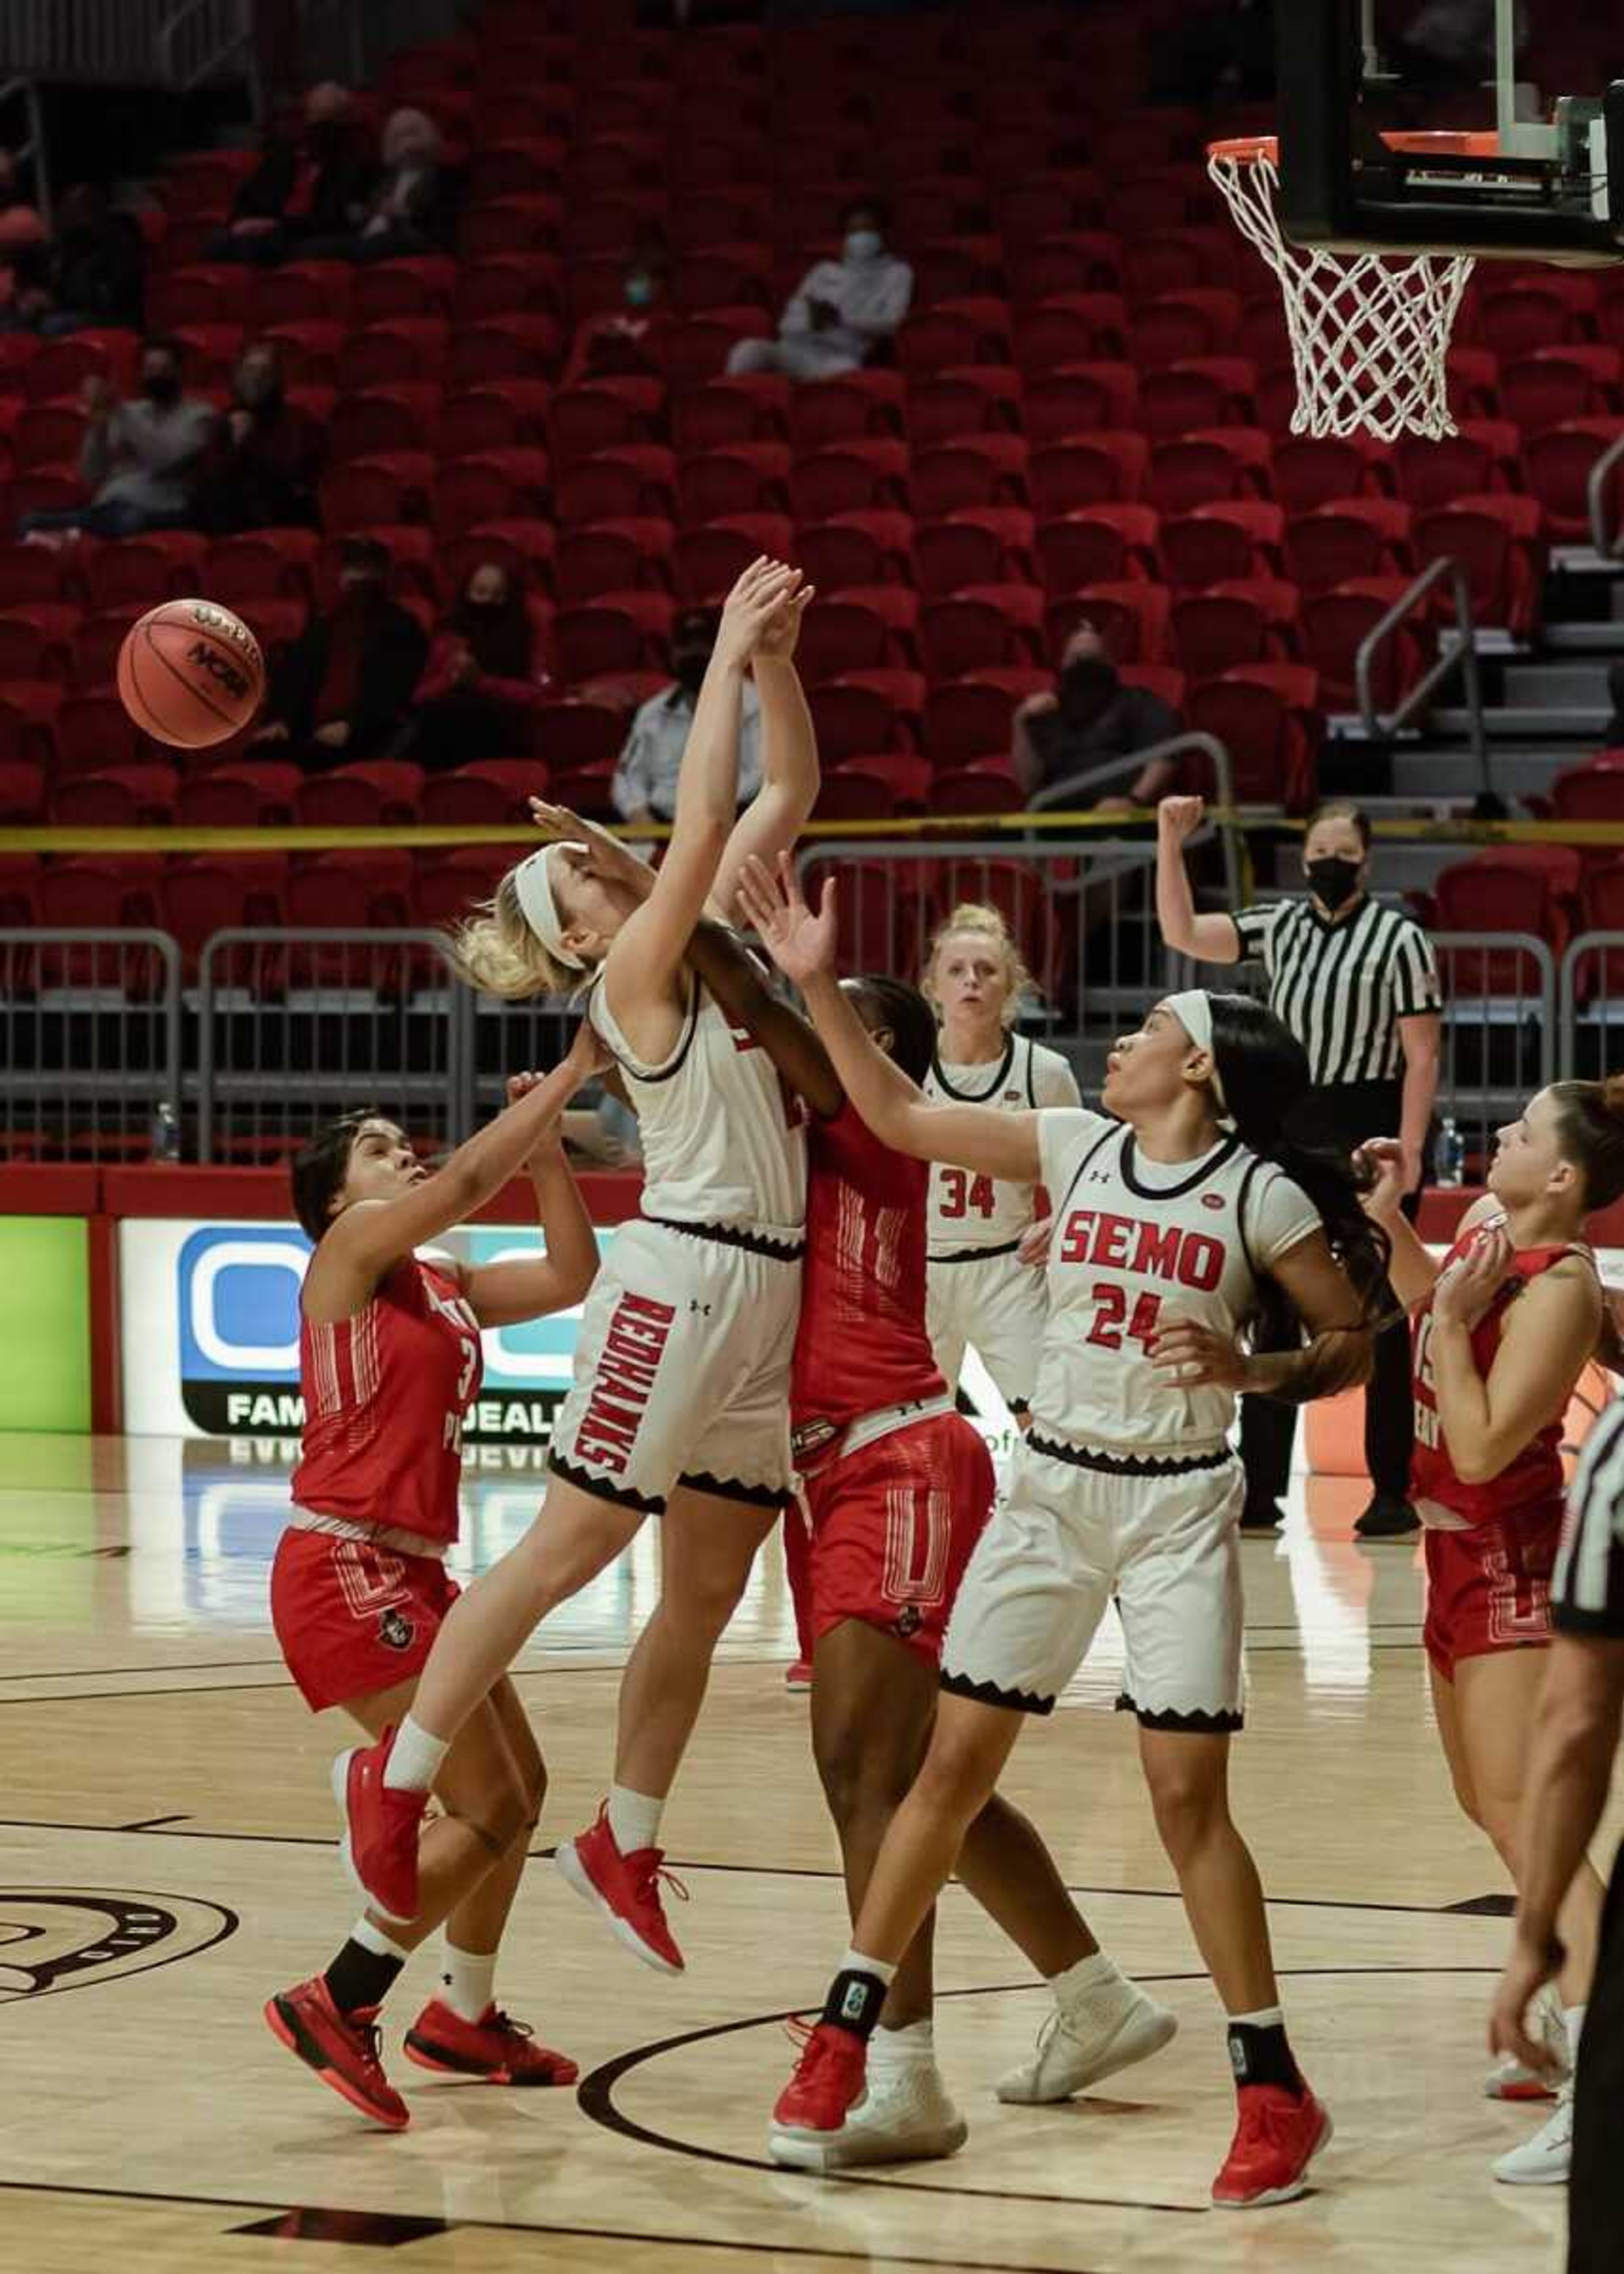 Sophomore forward Sophia Hancock is fouled driving to the rim in a 74-61 win over Austin Peay on Jan. 16 at the Show Me Center in Cape Girardeau.